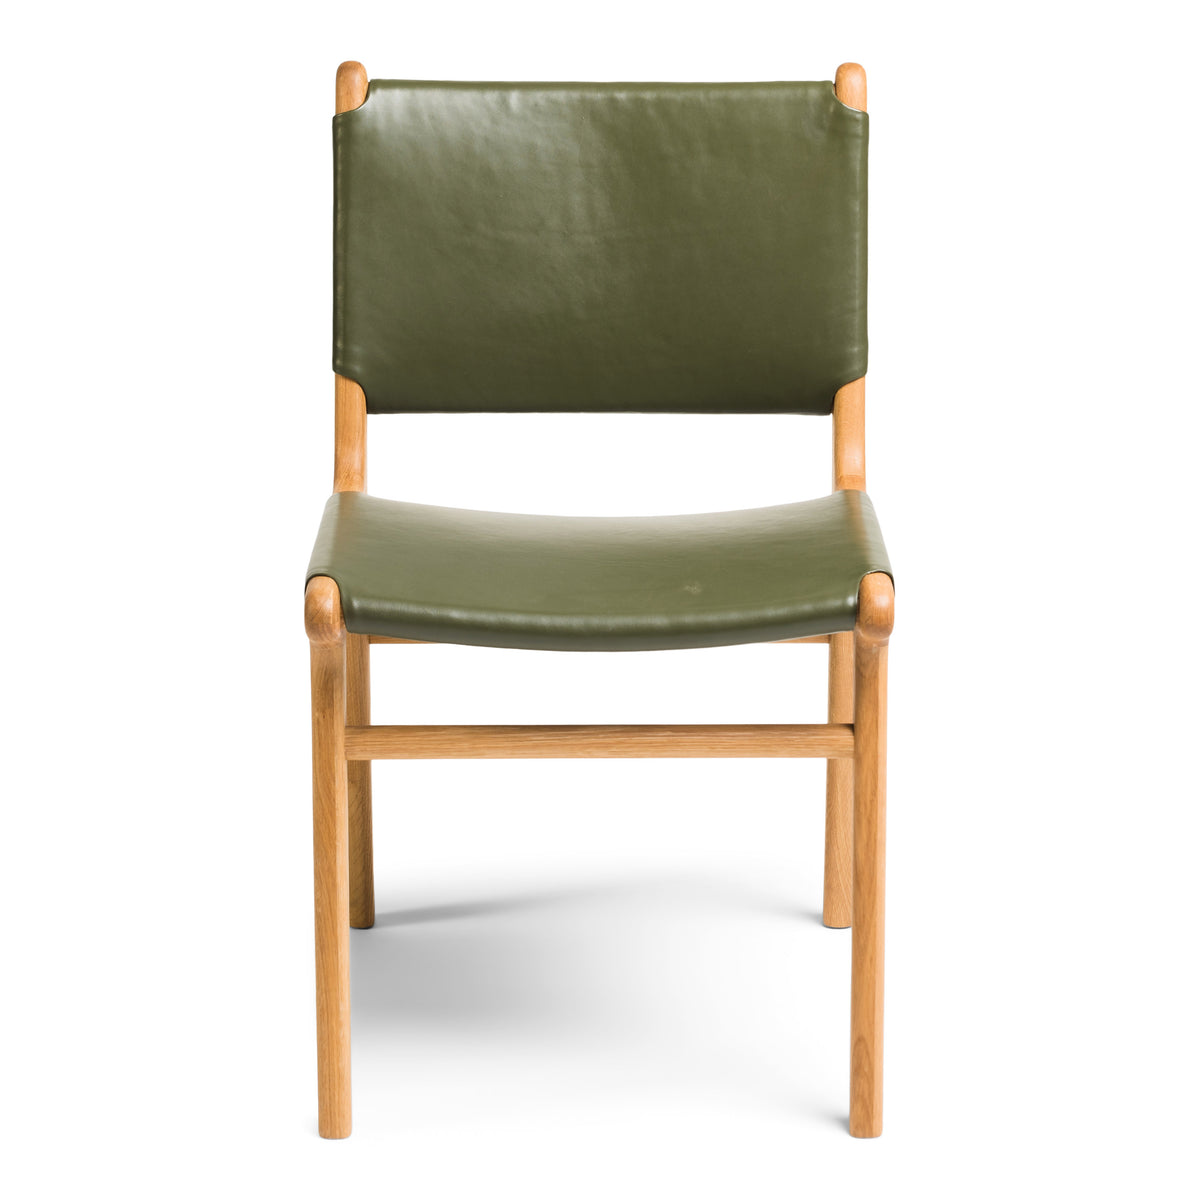 Spensley Dining Chair - Olive